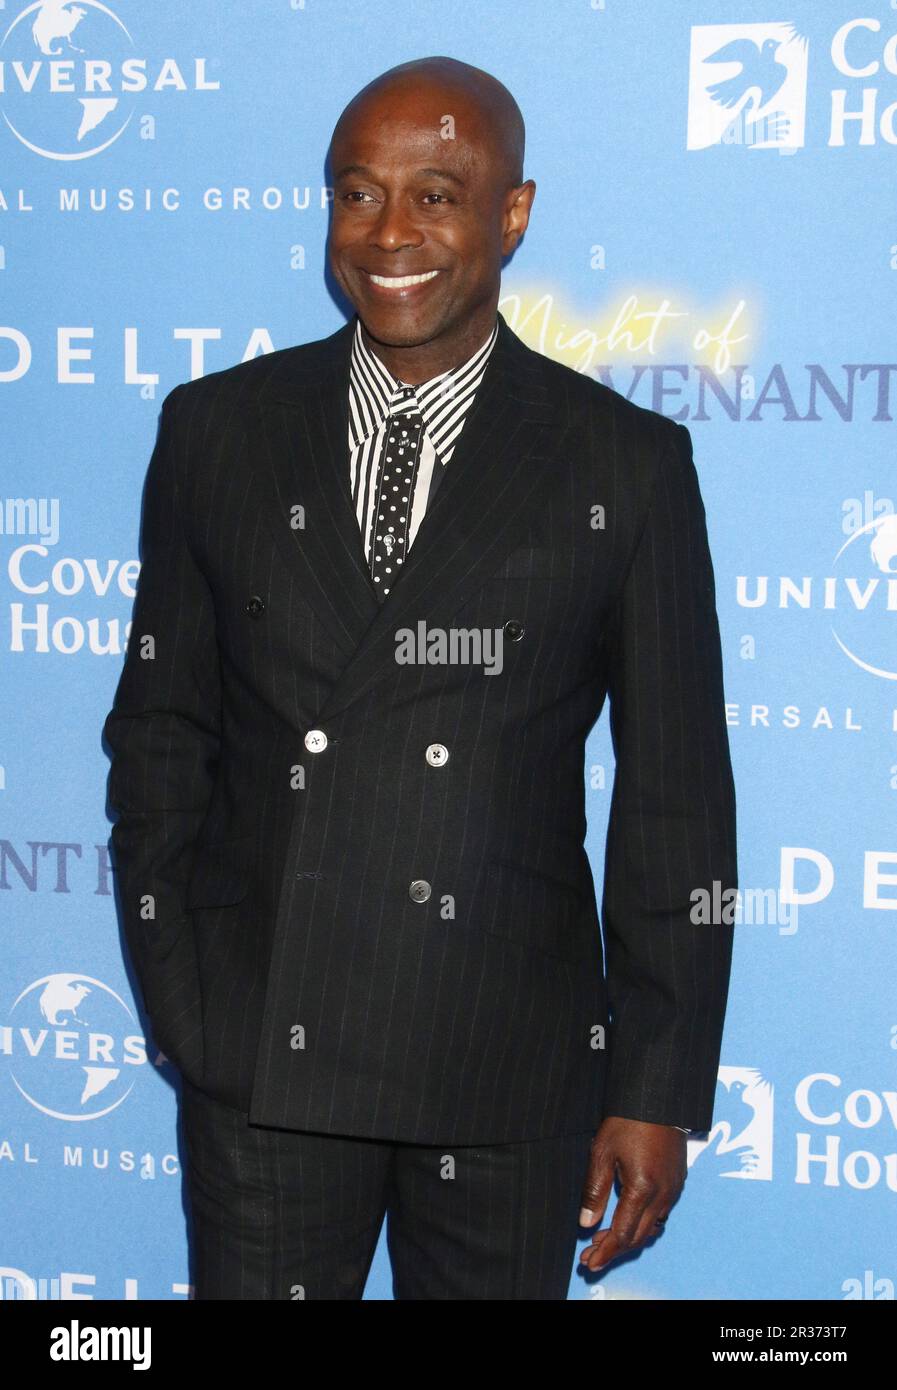 New York, New York, USA. 22. Mai 2023. KEM at Covenant House's A Night of Covenant House Stars Gala at the Rooftop Pavilion and Terrace at the Javits Center in New York City Credit: RW/Media Punch/Alamy Live News Stockfoto